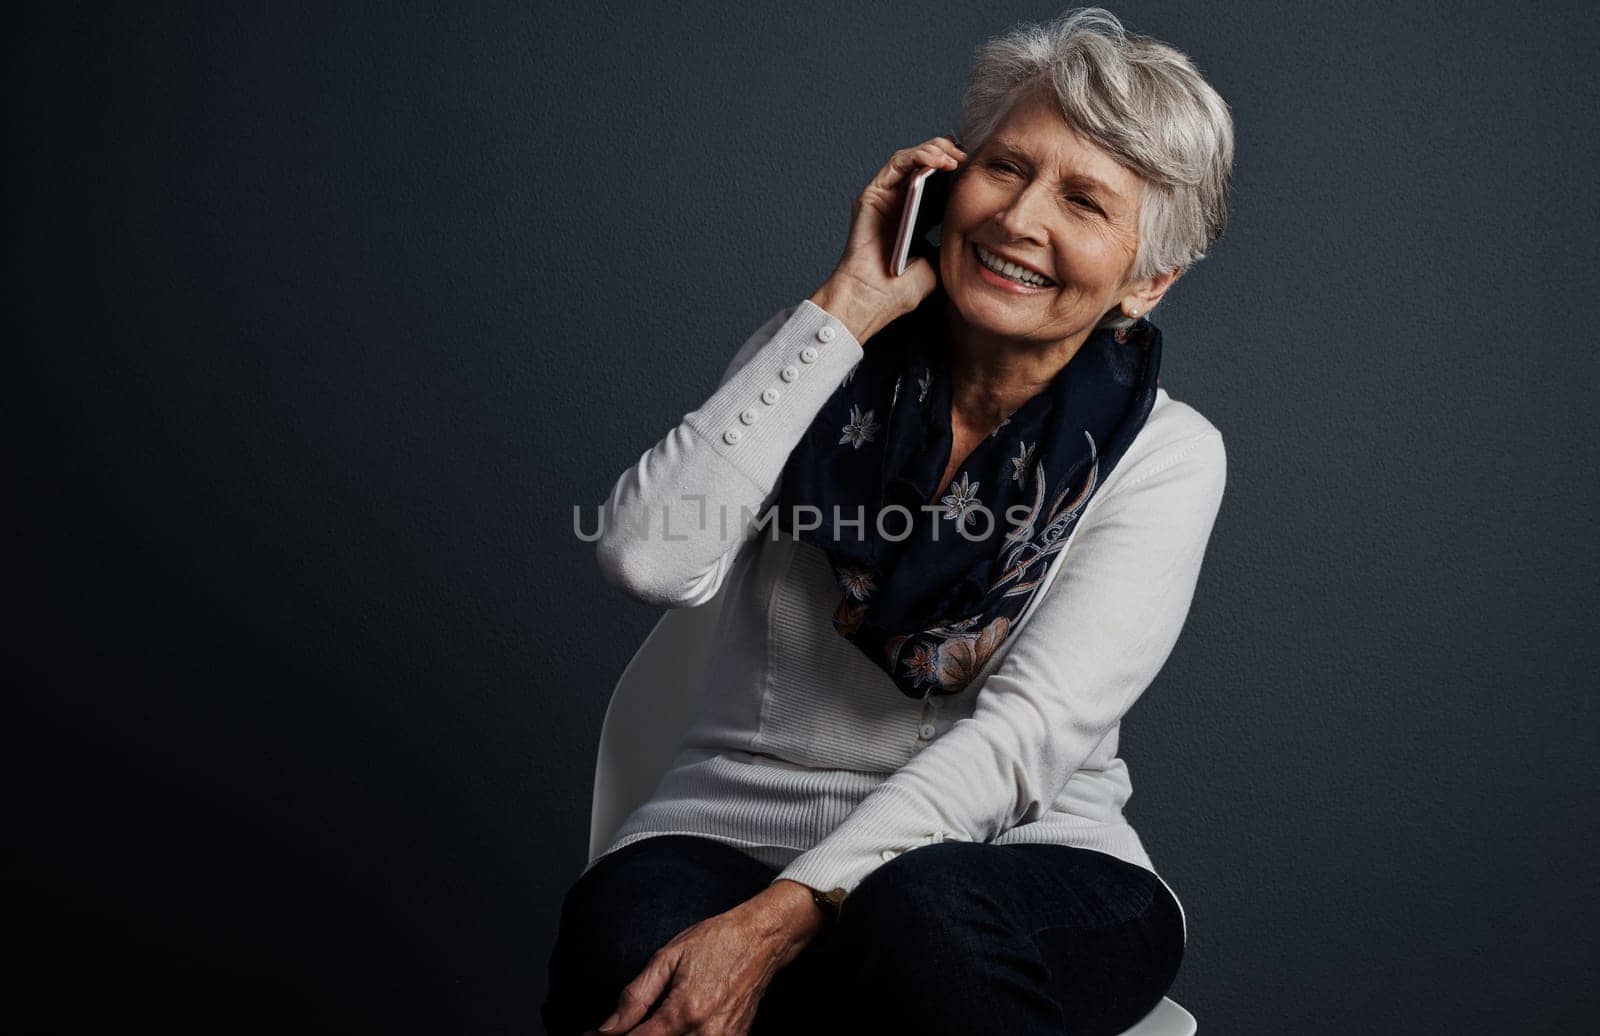 Yes I do indeed own a cellphone. Studio shot of a cheerful elderly woman sitting down and talking on her cellphone